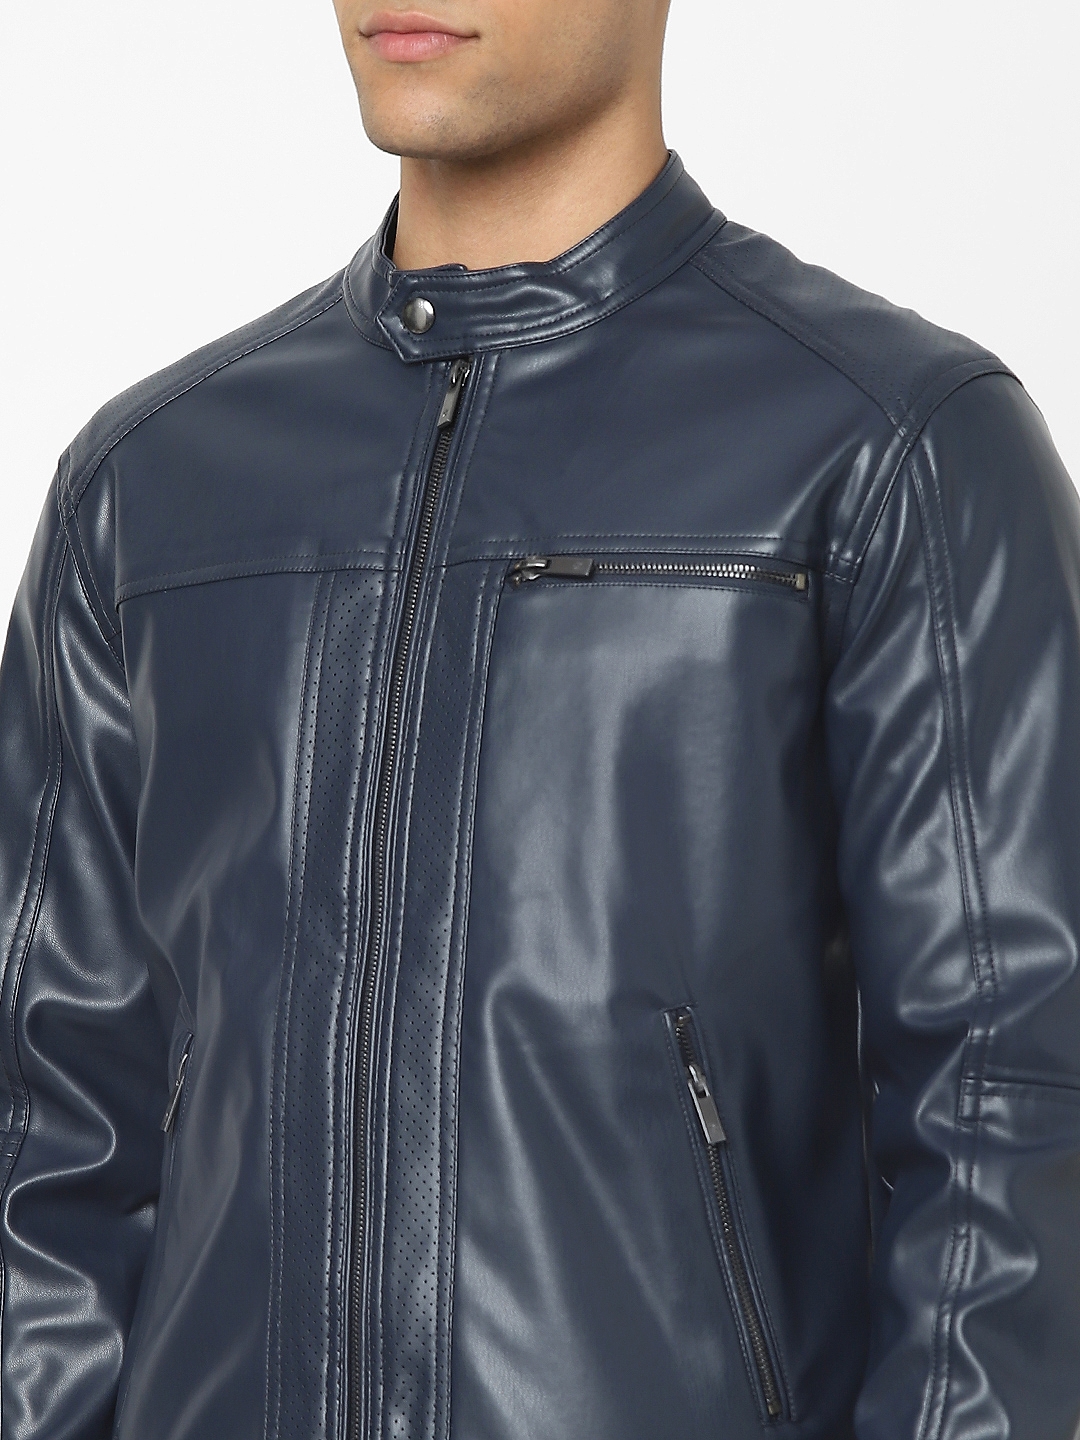 Men's Navy Solid Leather Jackets